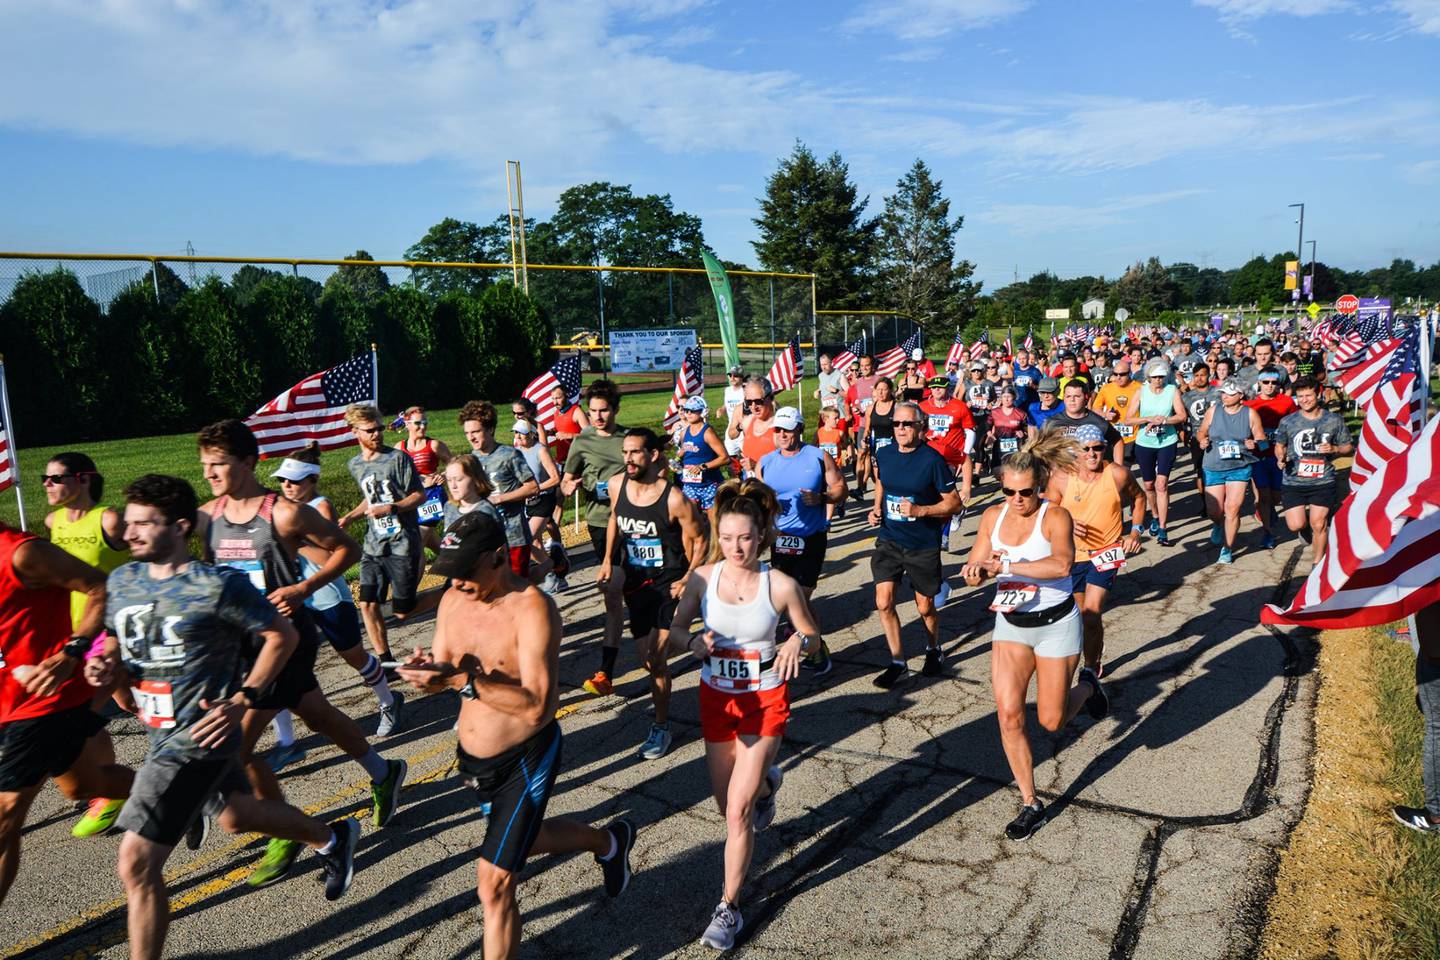 The McHenry County Patriot Run took place Sunday, June 27, 2021, at McHenry County College in Crystal Lake.